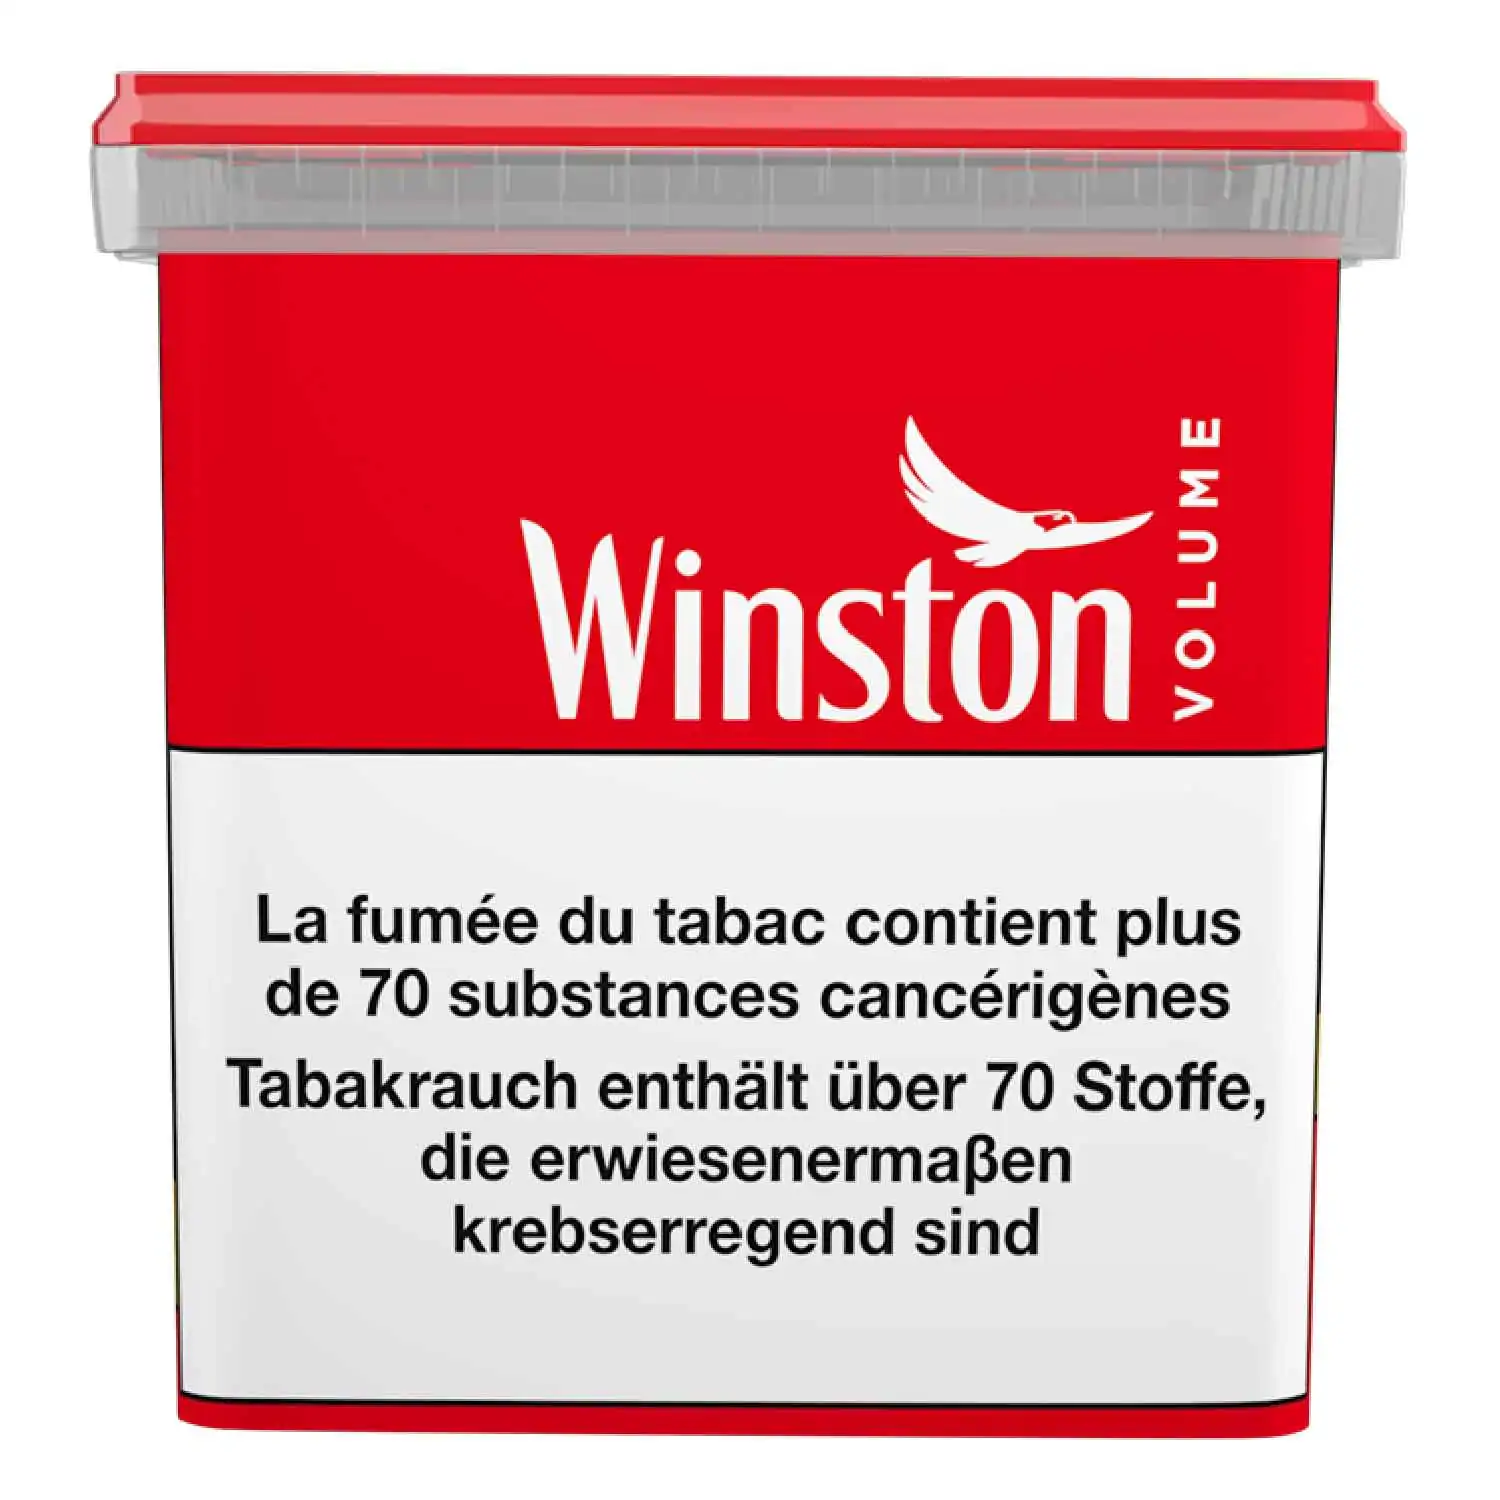 Winston volume rouge 250g - Buy at Real Tobacco